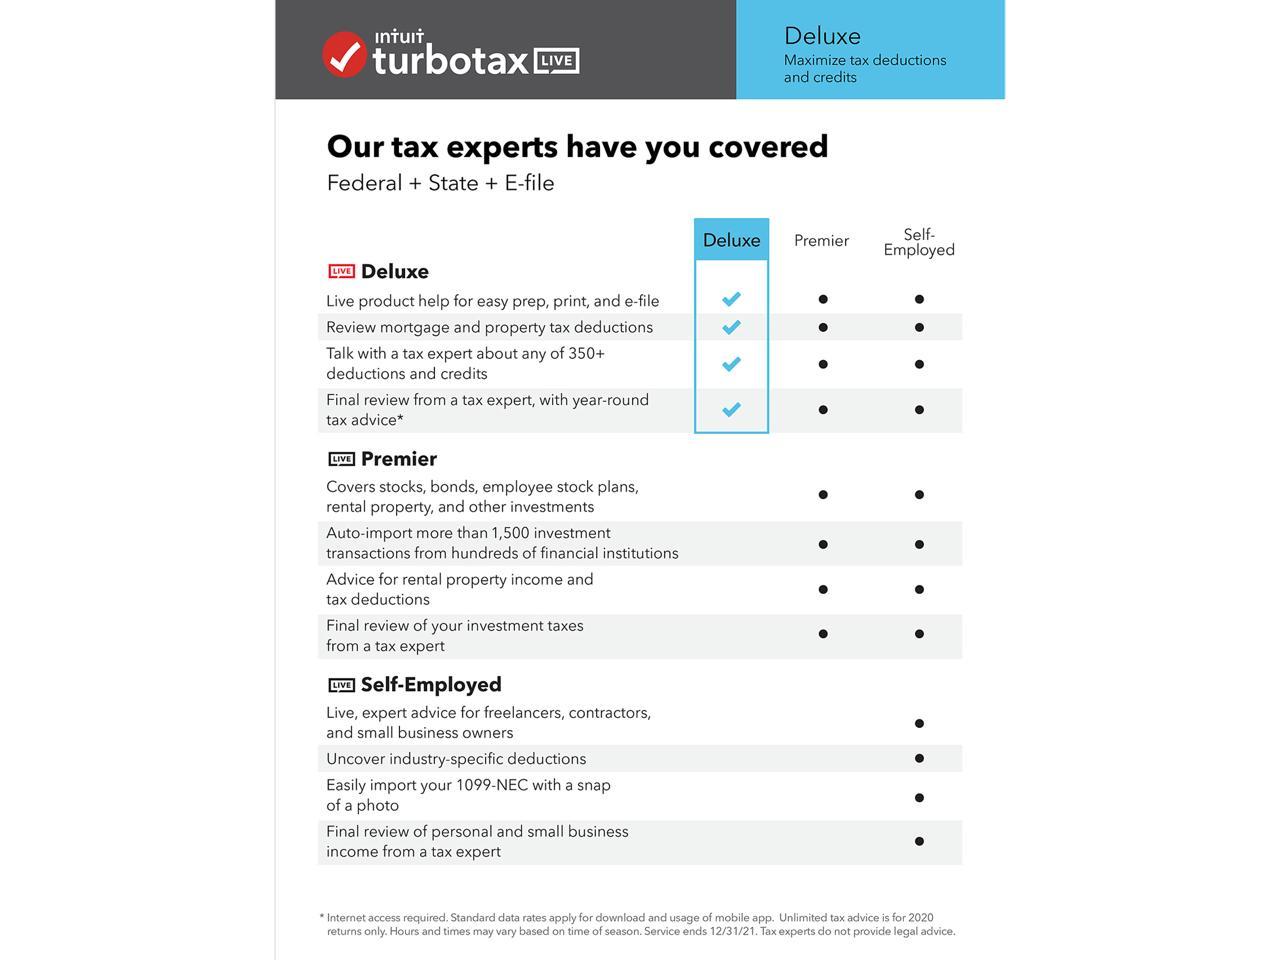 TurboTax LIVE Deluxe, Tax Experts and CPAs on Your Screen to help plus Final Review, 2020 Tax